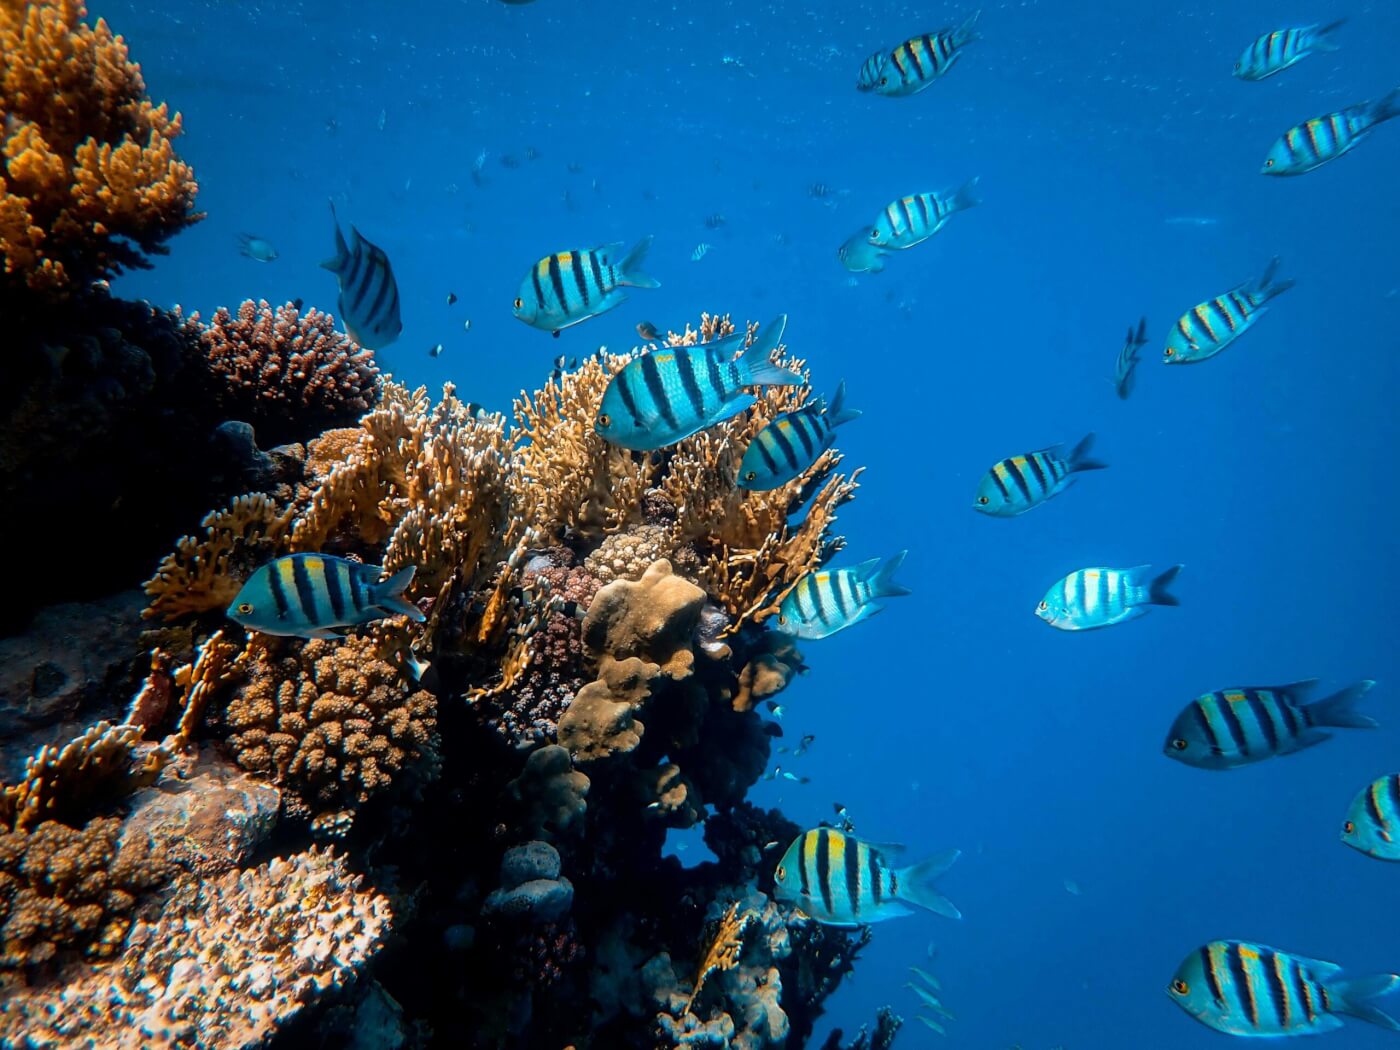 Fish swimming near a coral reef.